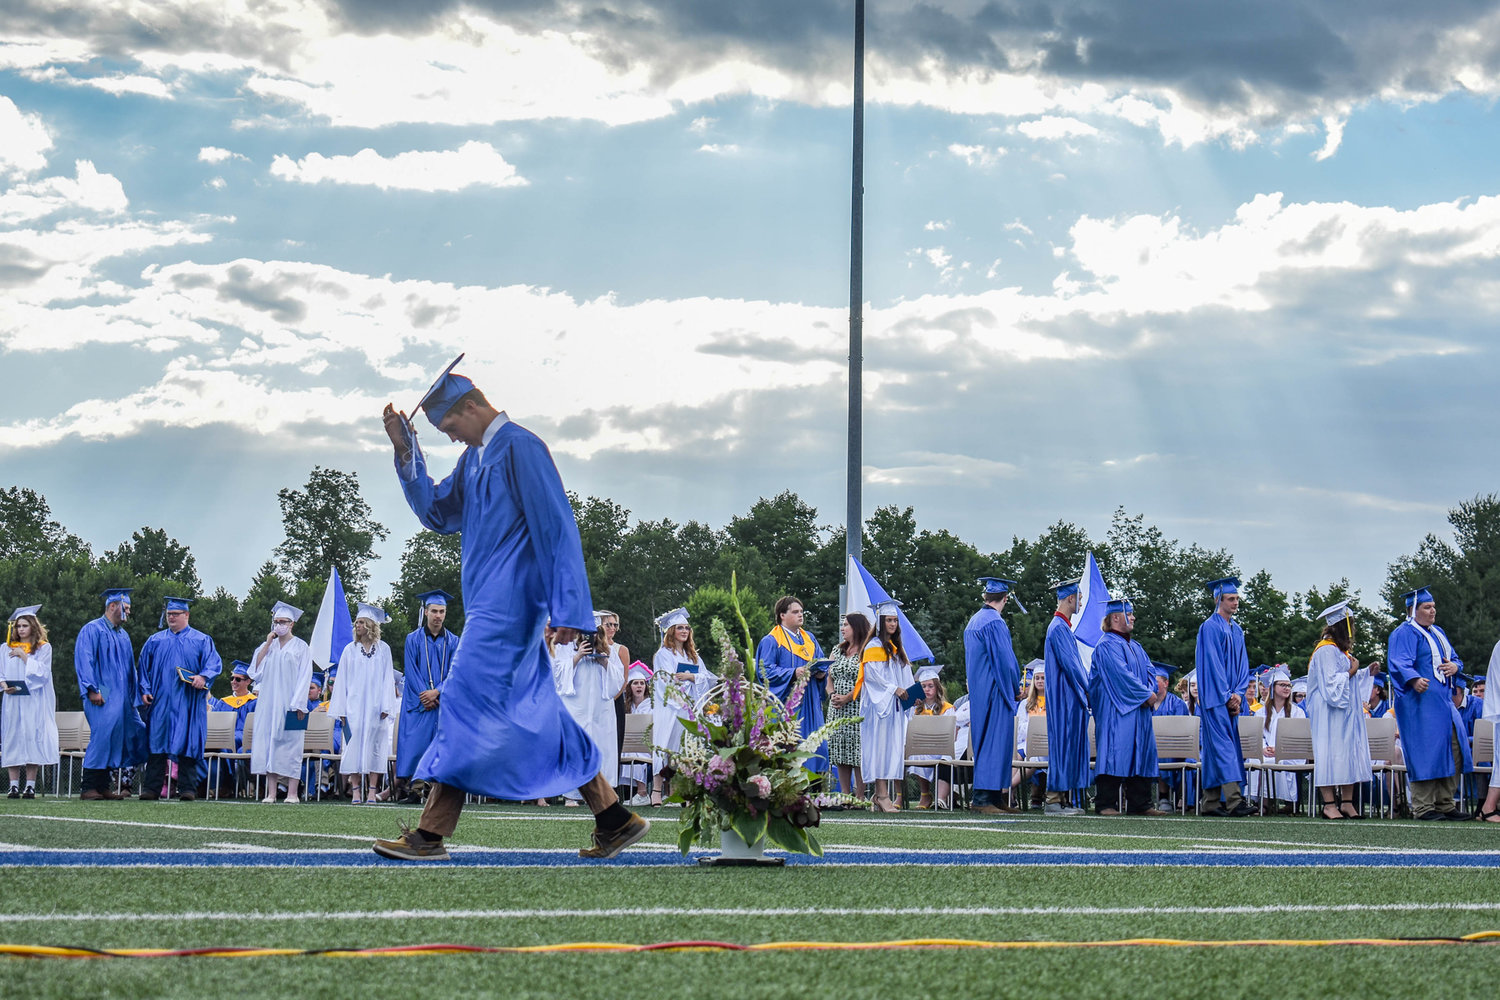 A soon-to-be graduate from Camden High School walks across the field to accept his diploma.